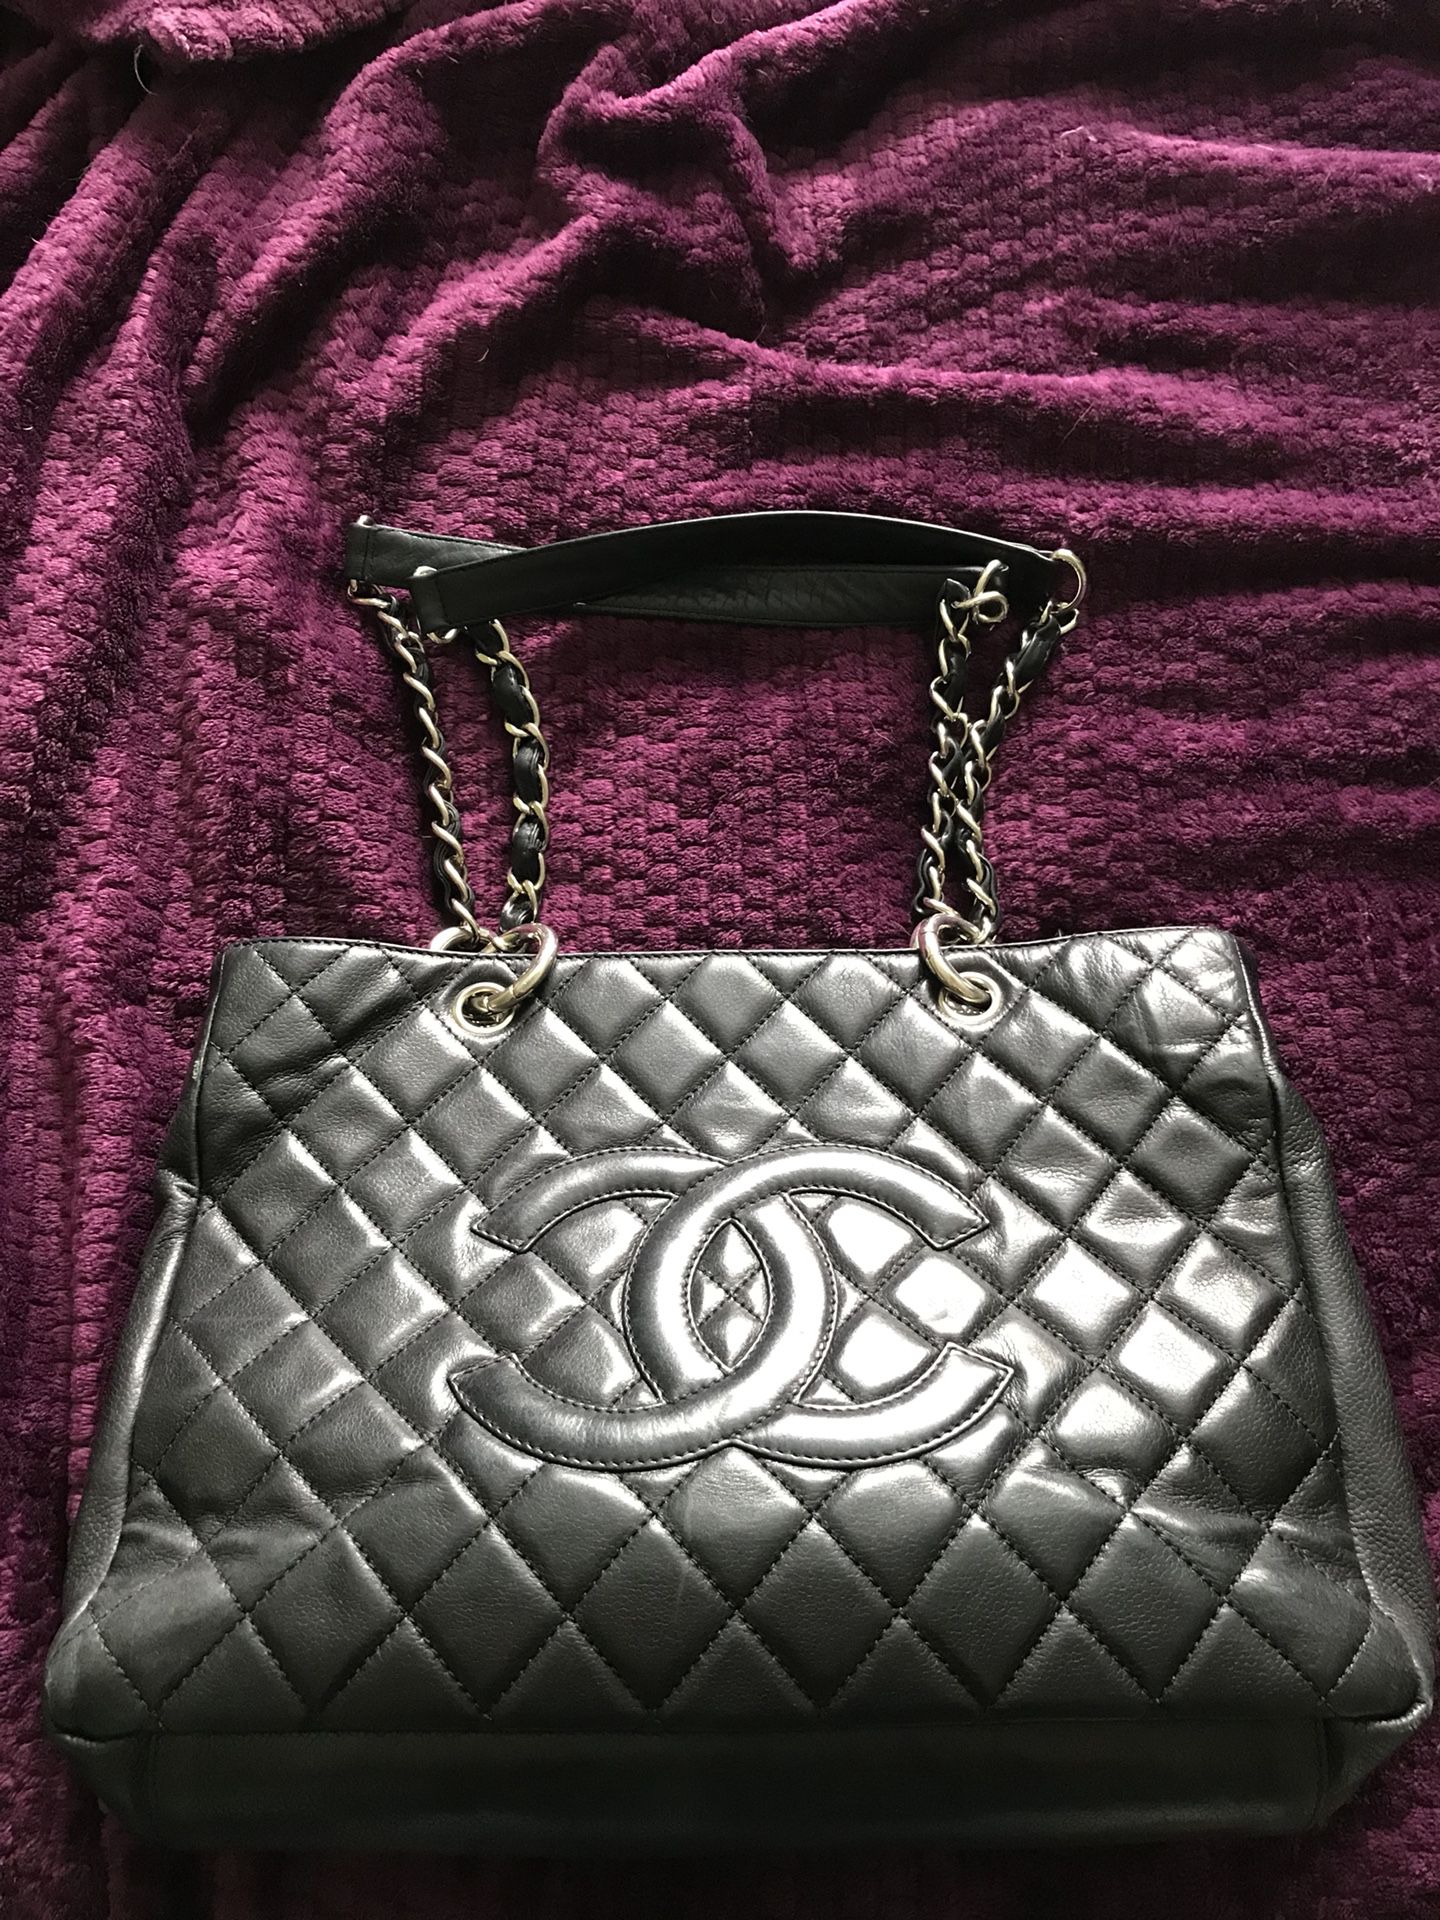 Chanel GST in black caviar leather with silver hardware